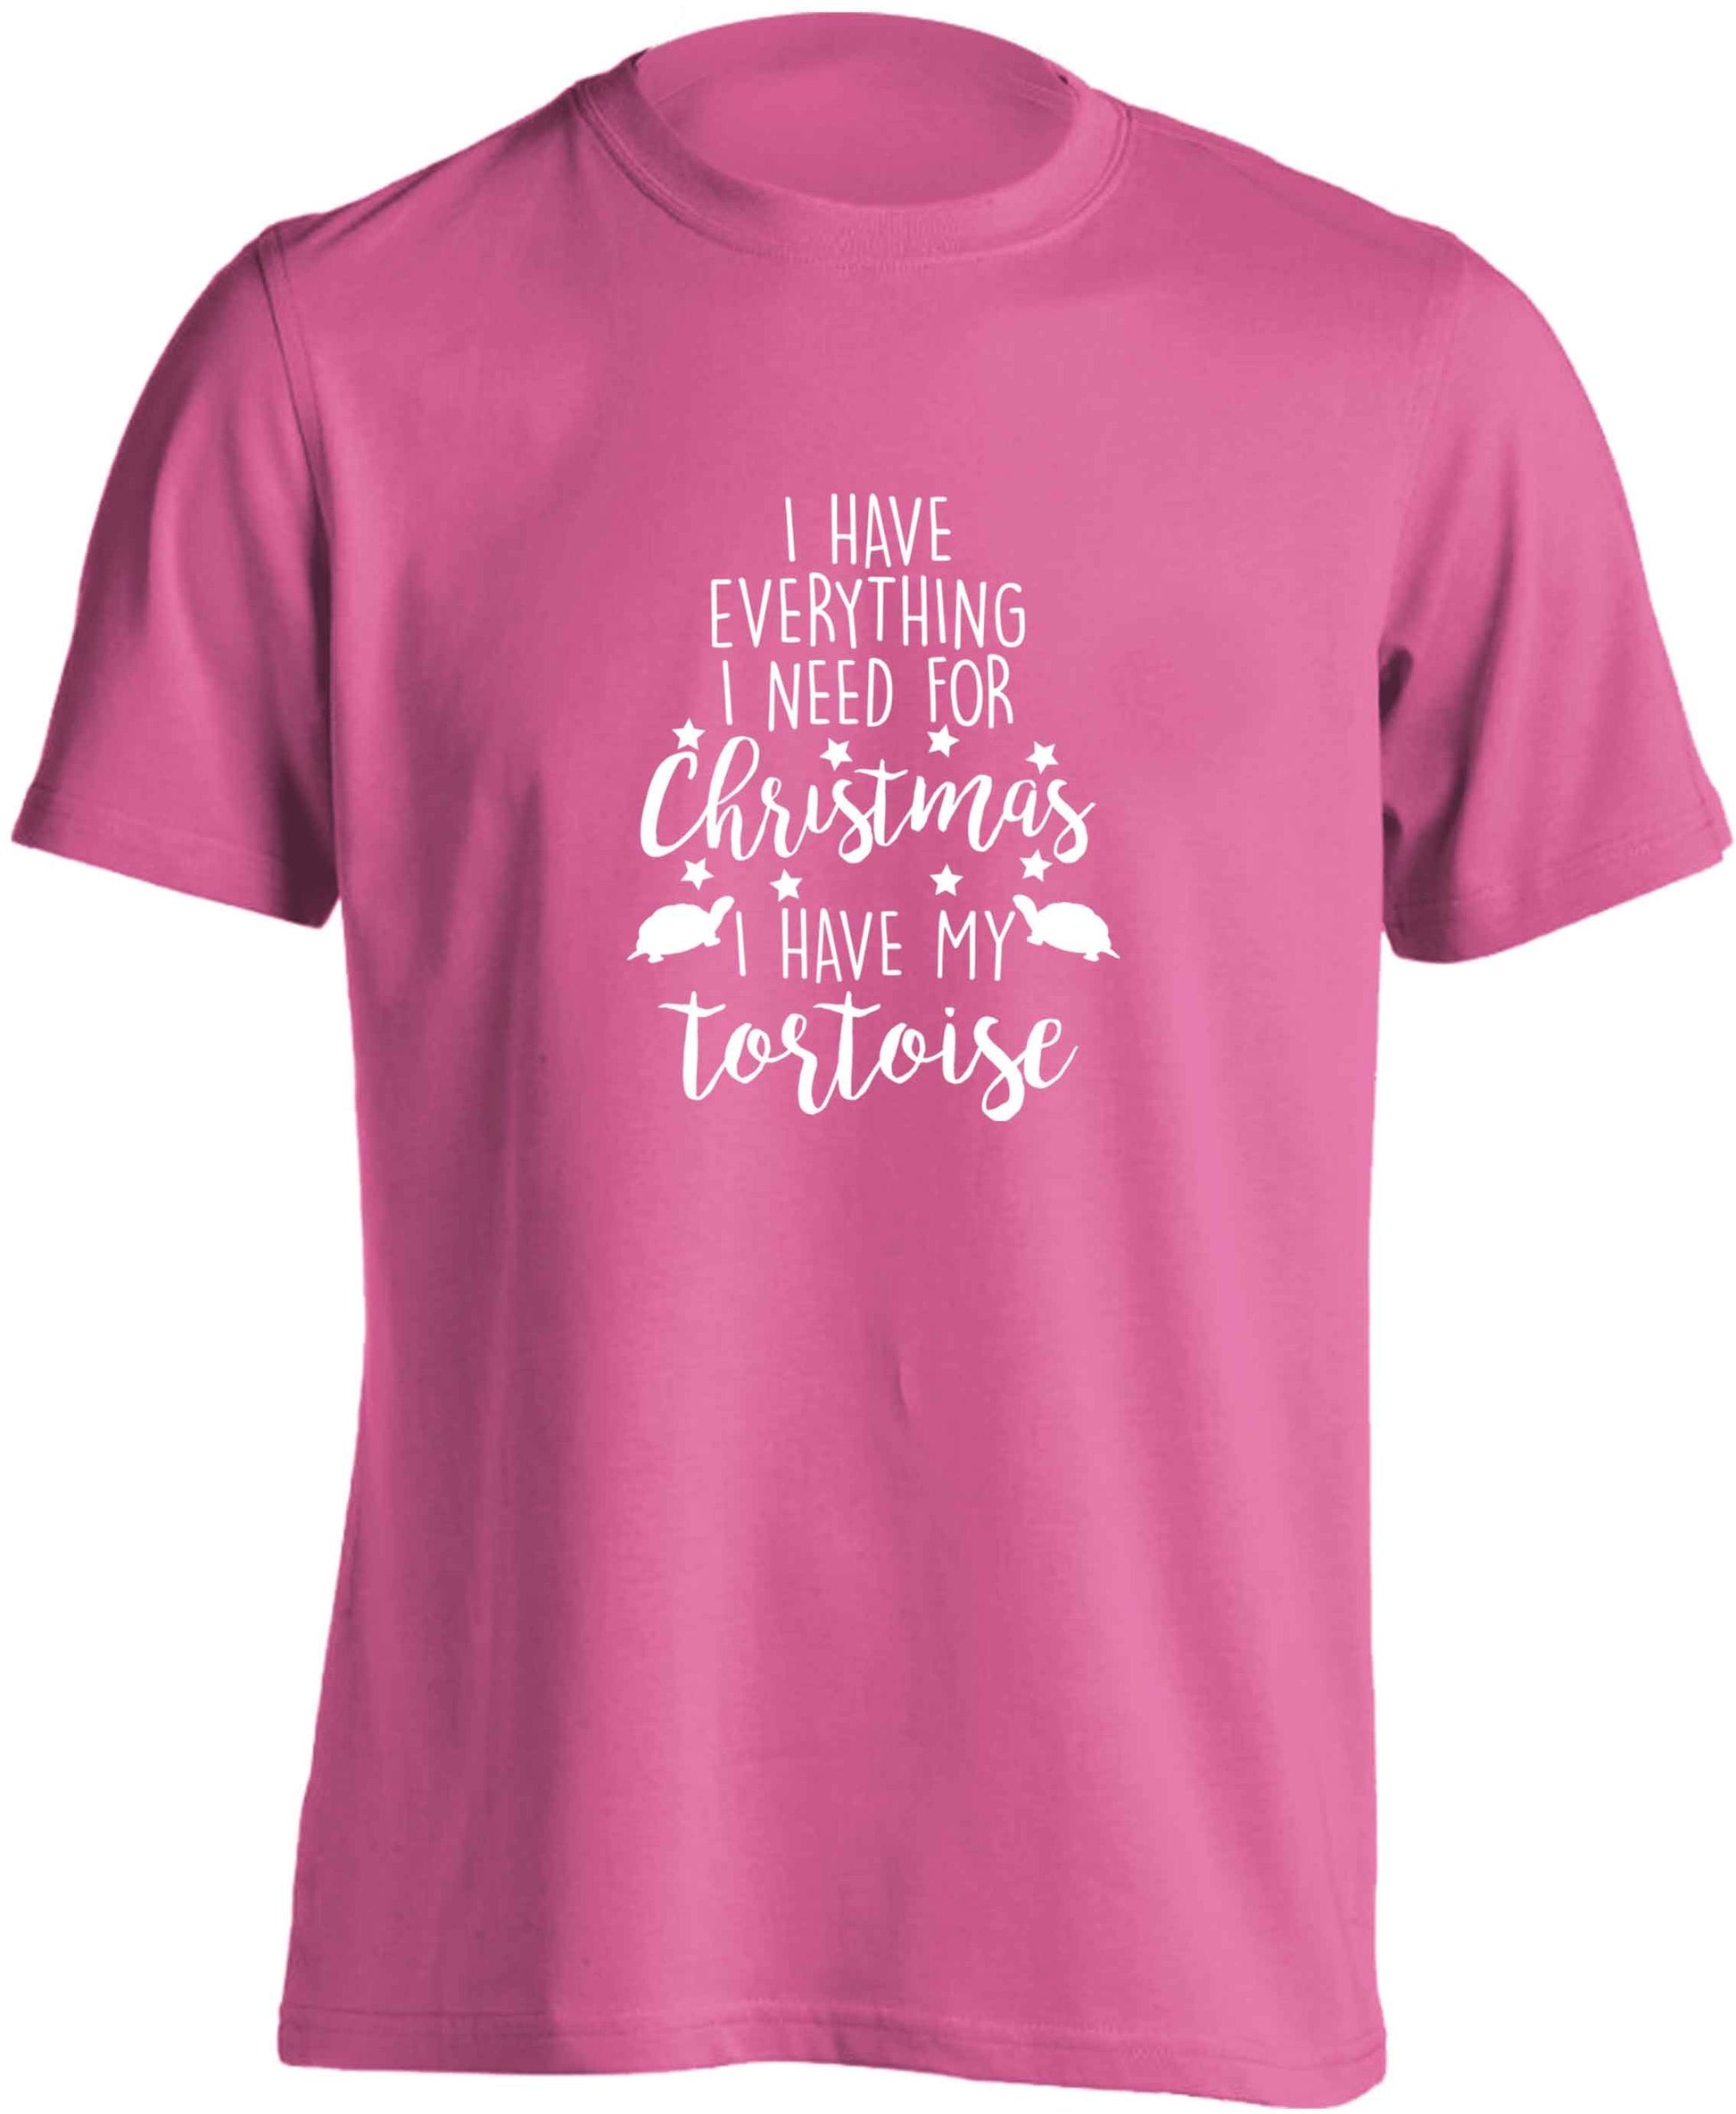 I have everything I need for Christmas I have my tortoise adults unisex pink Tshirt 2XL